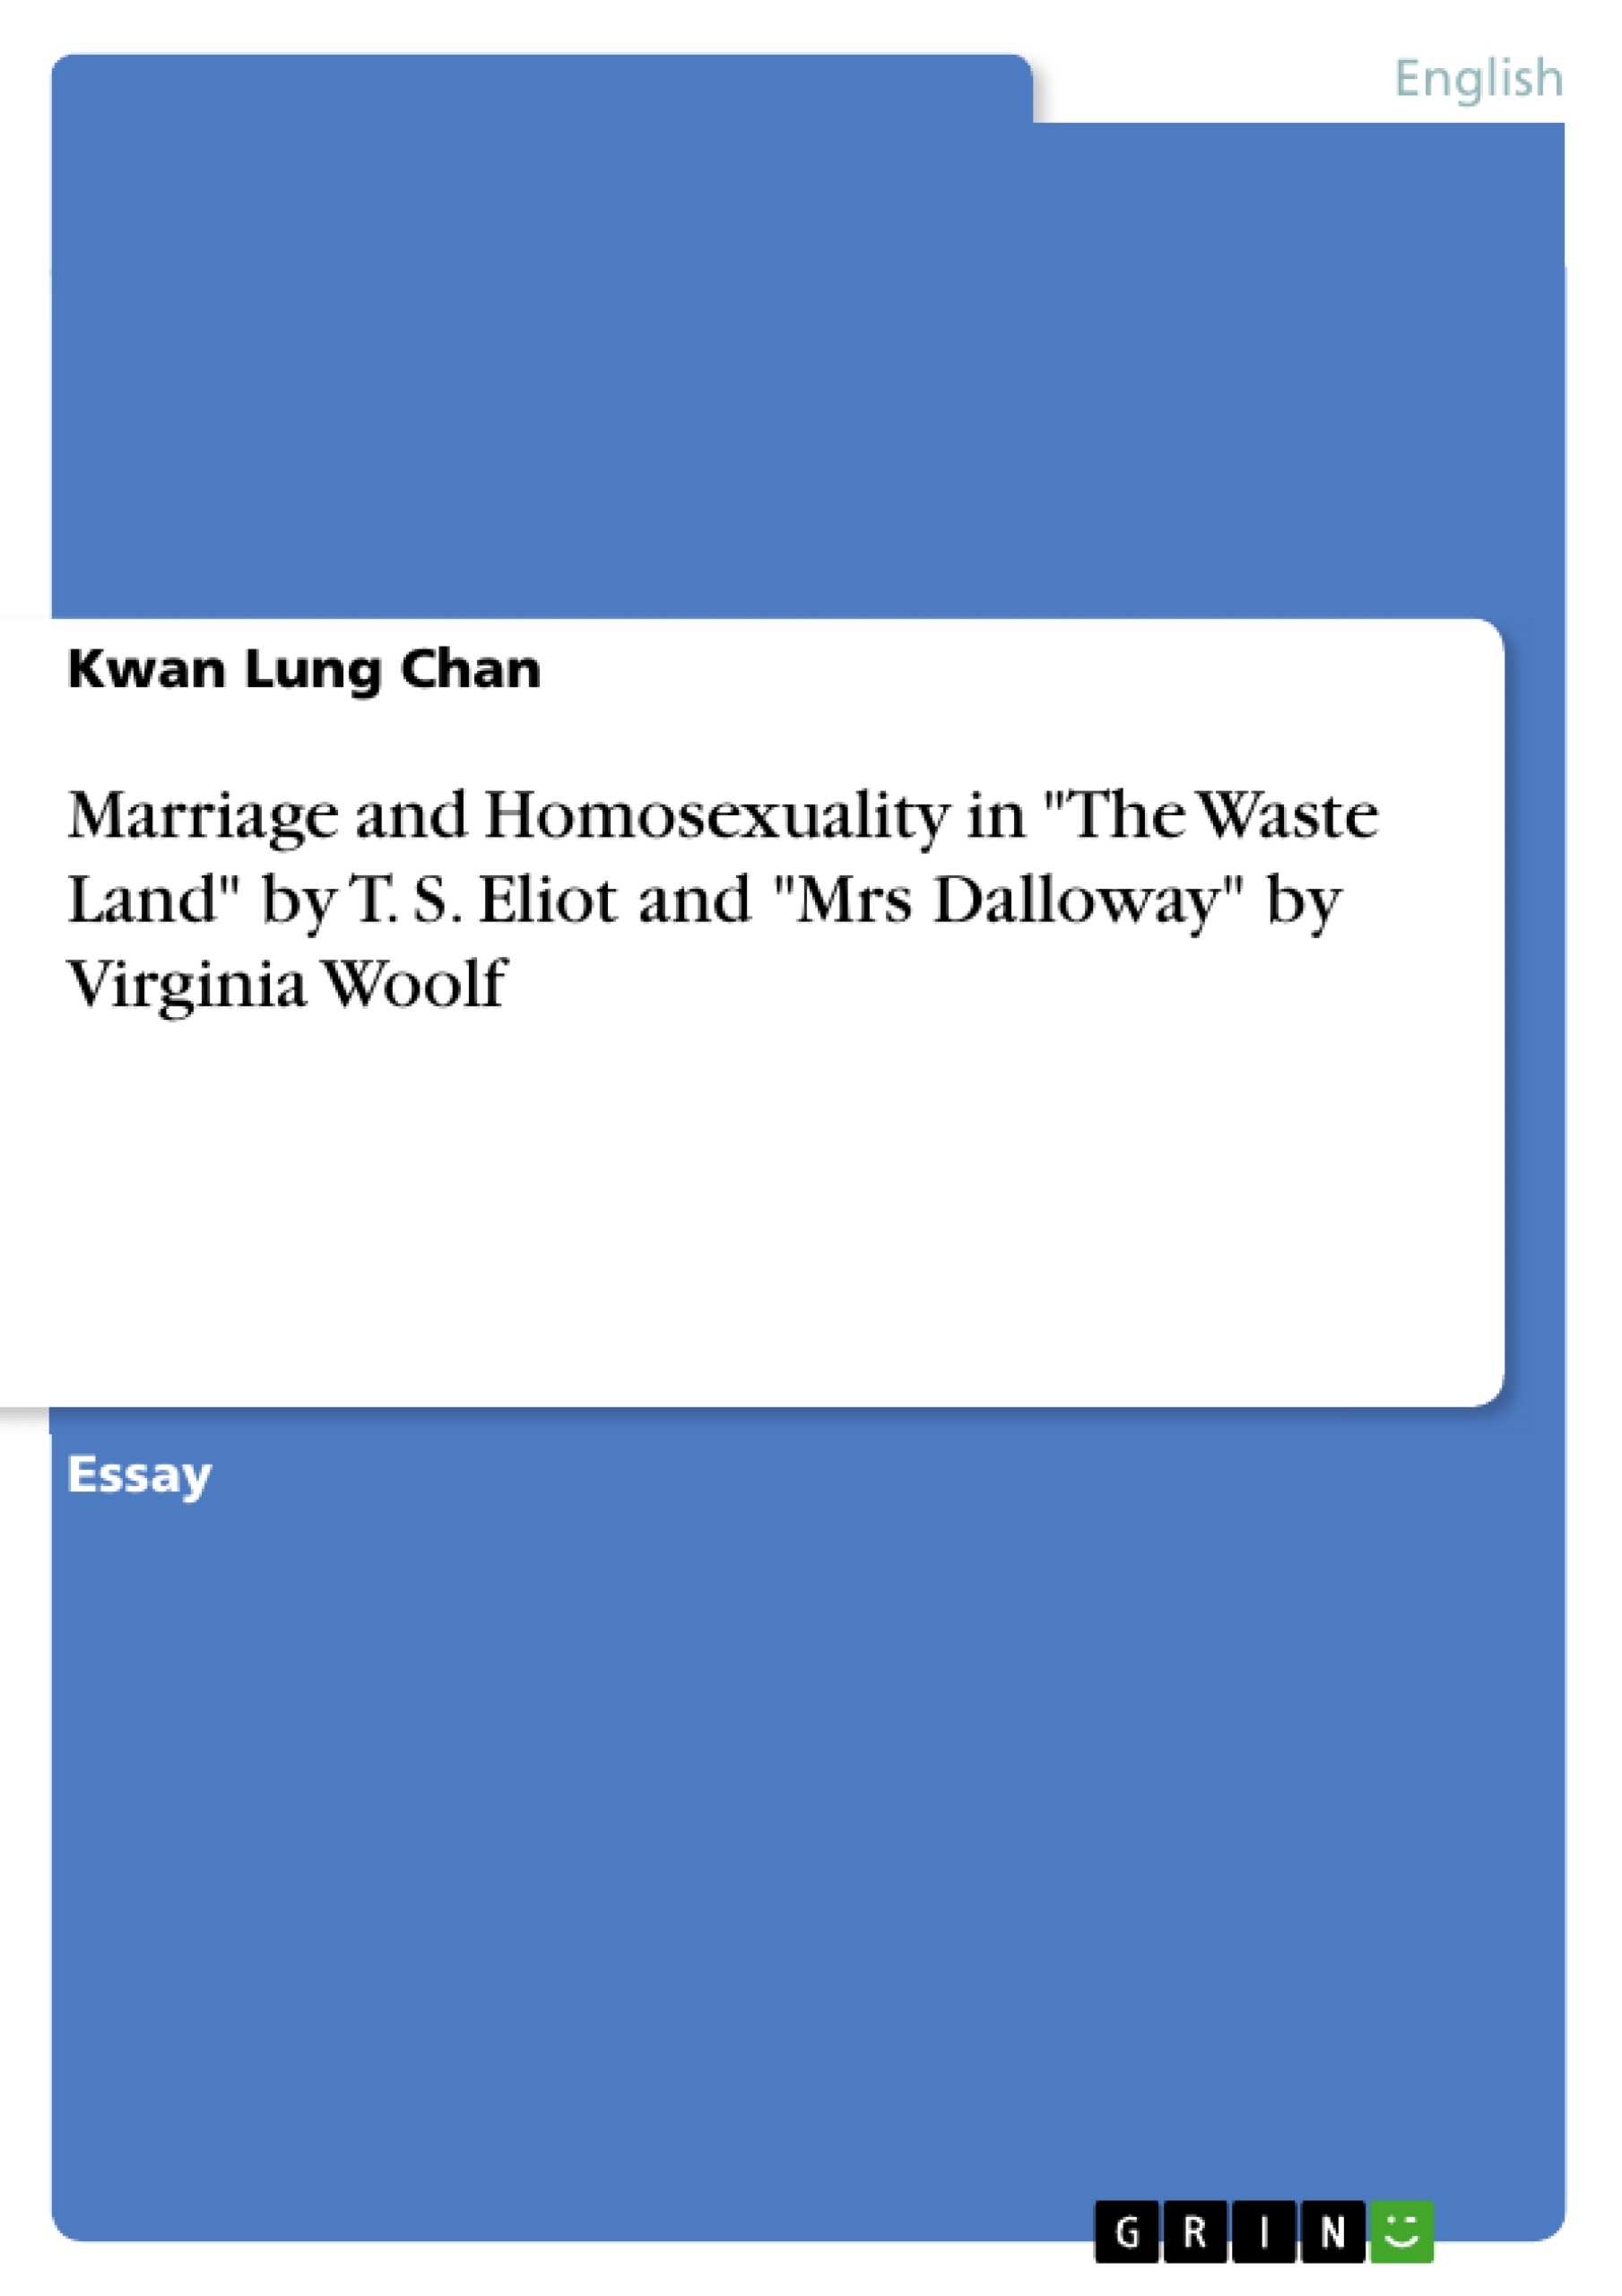 Titre: Marriage and Homosexuality in "The Waste Land" by T. S. Eliot and "Mrs Dalloway" by Virginia Woolf